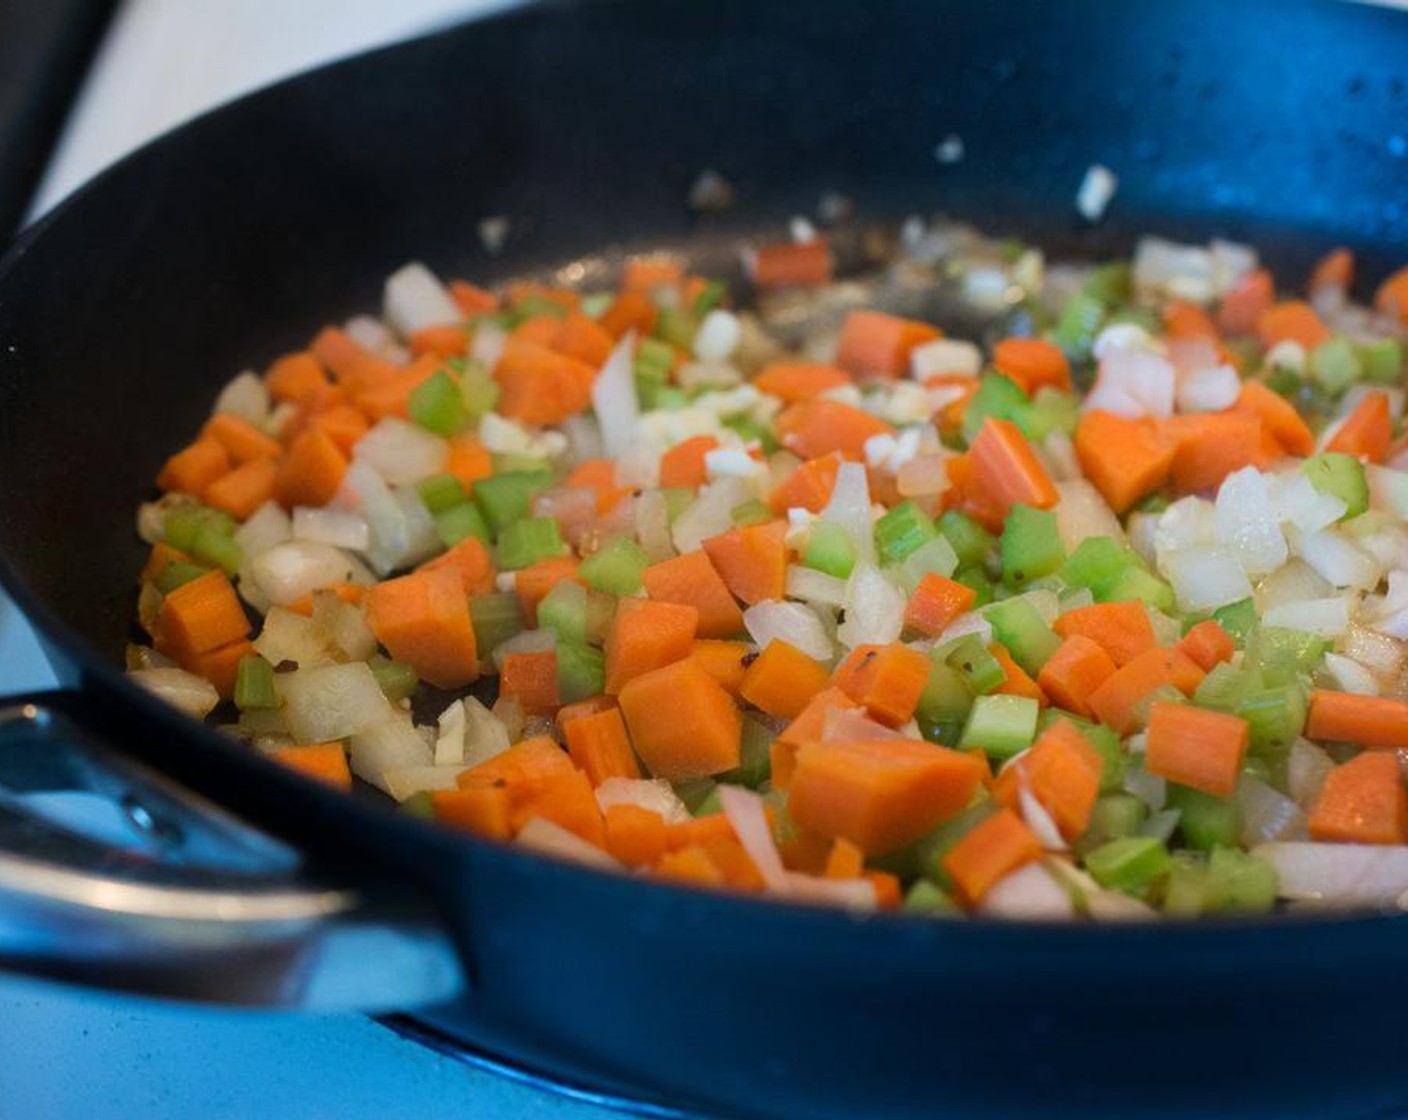 step 2 Saute the Carrot (1 cup), Celery (1 cup), White Onion (1 cup) and Garlic (4 cloves) in Butter (2 Tbsp) under medium heat for about 5 minutes.